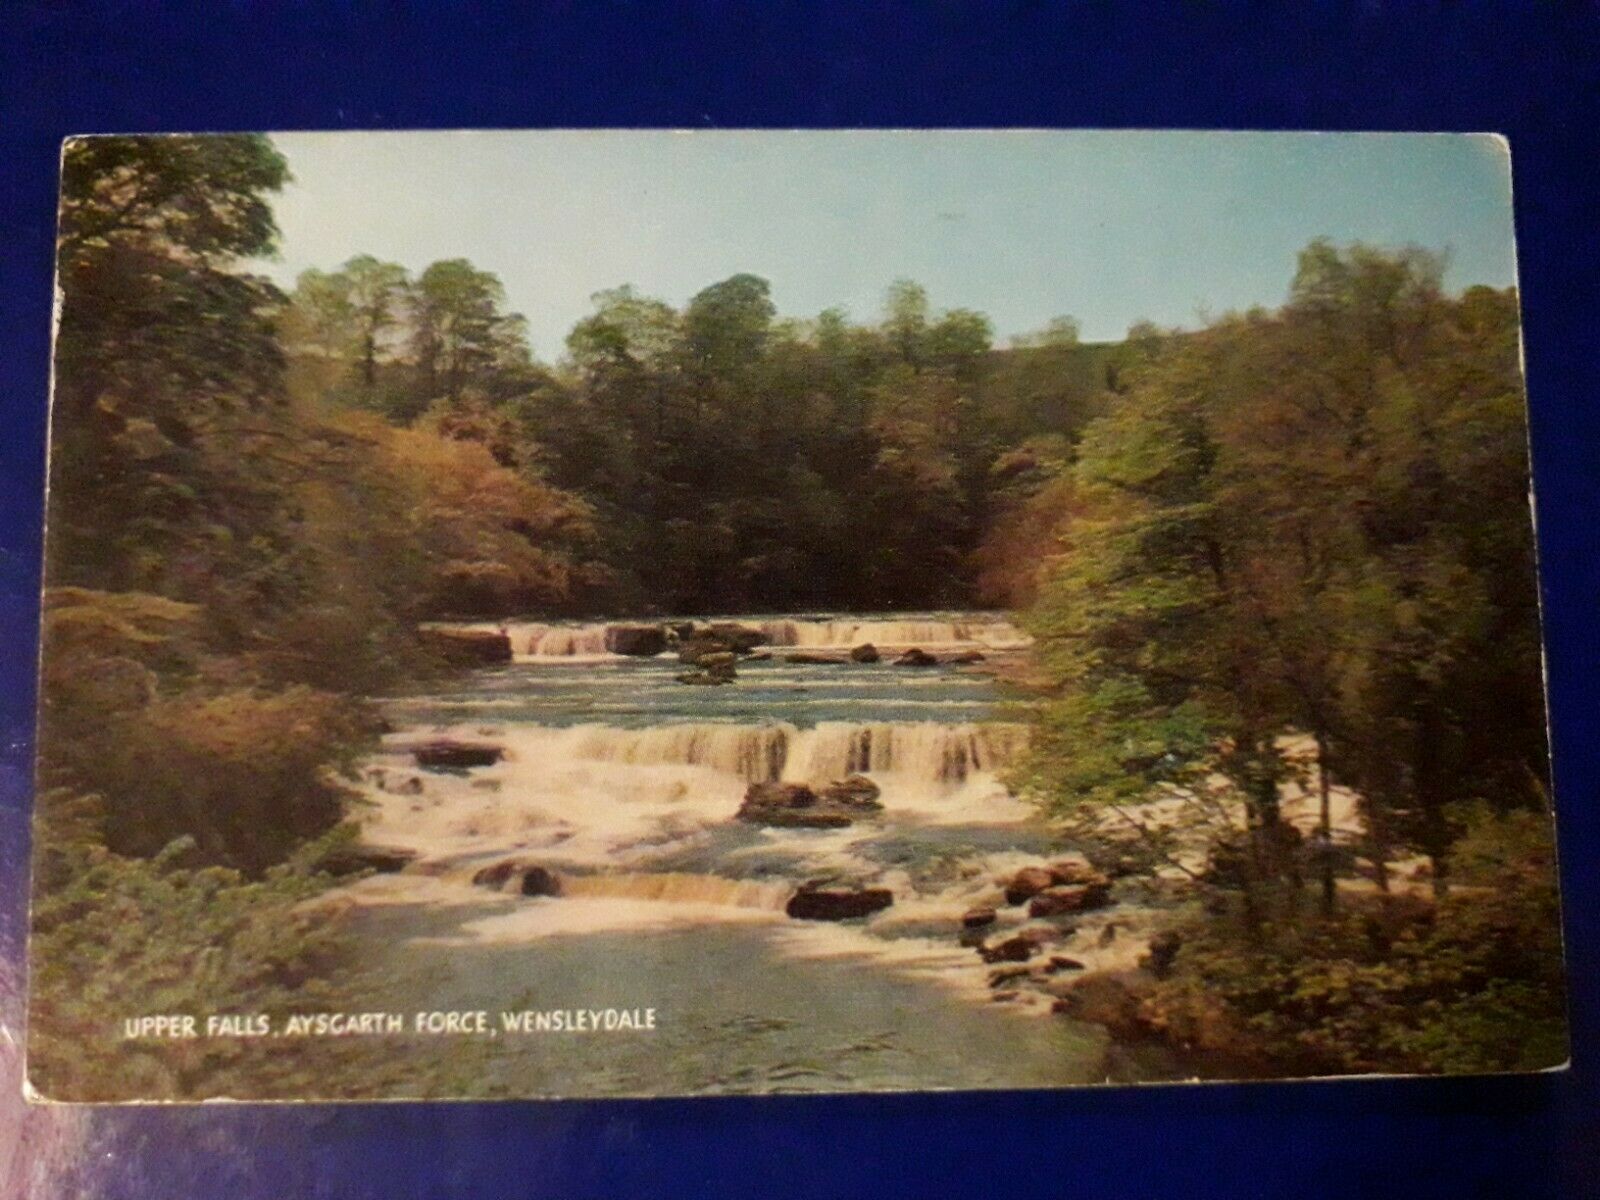 House Clearance - Upper Falls Aysgarth Force Wensleydale Salmon Service